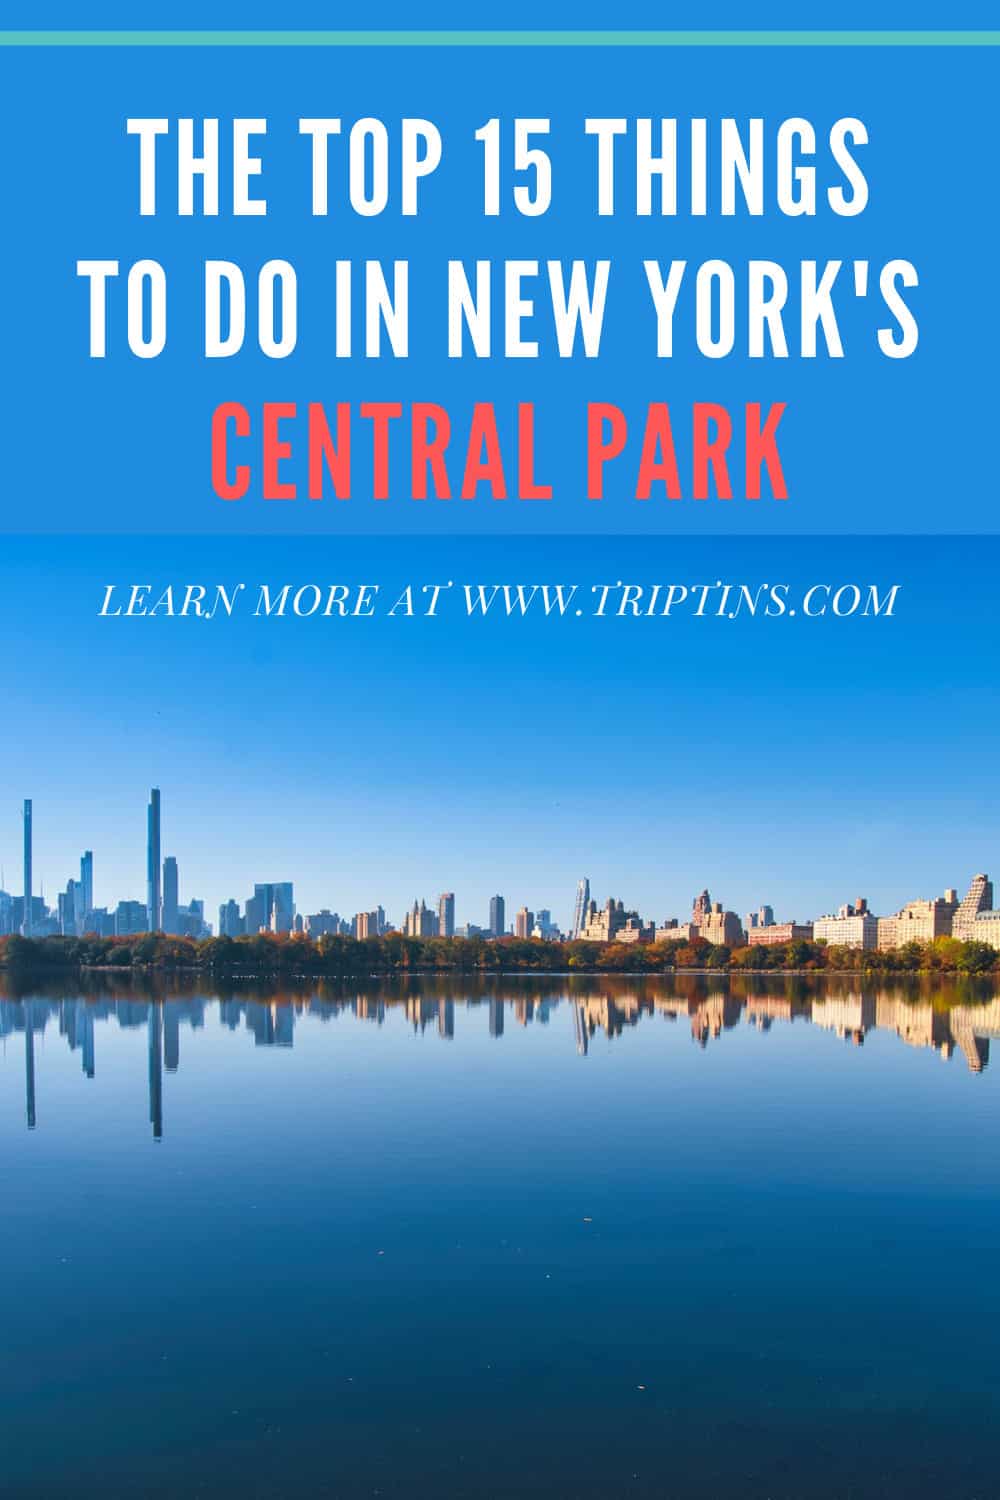 Best Things To Do in Central Park